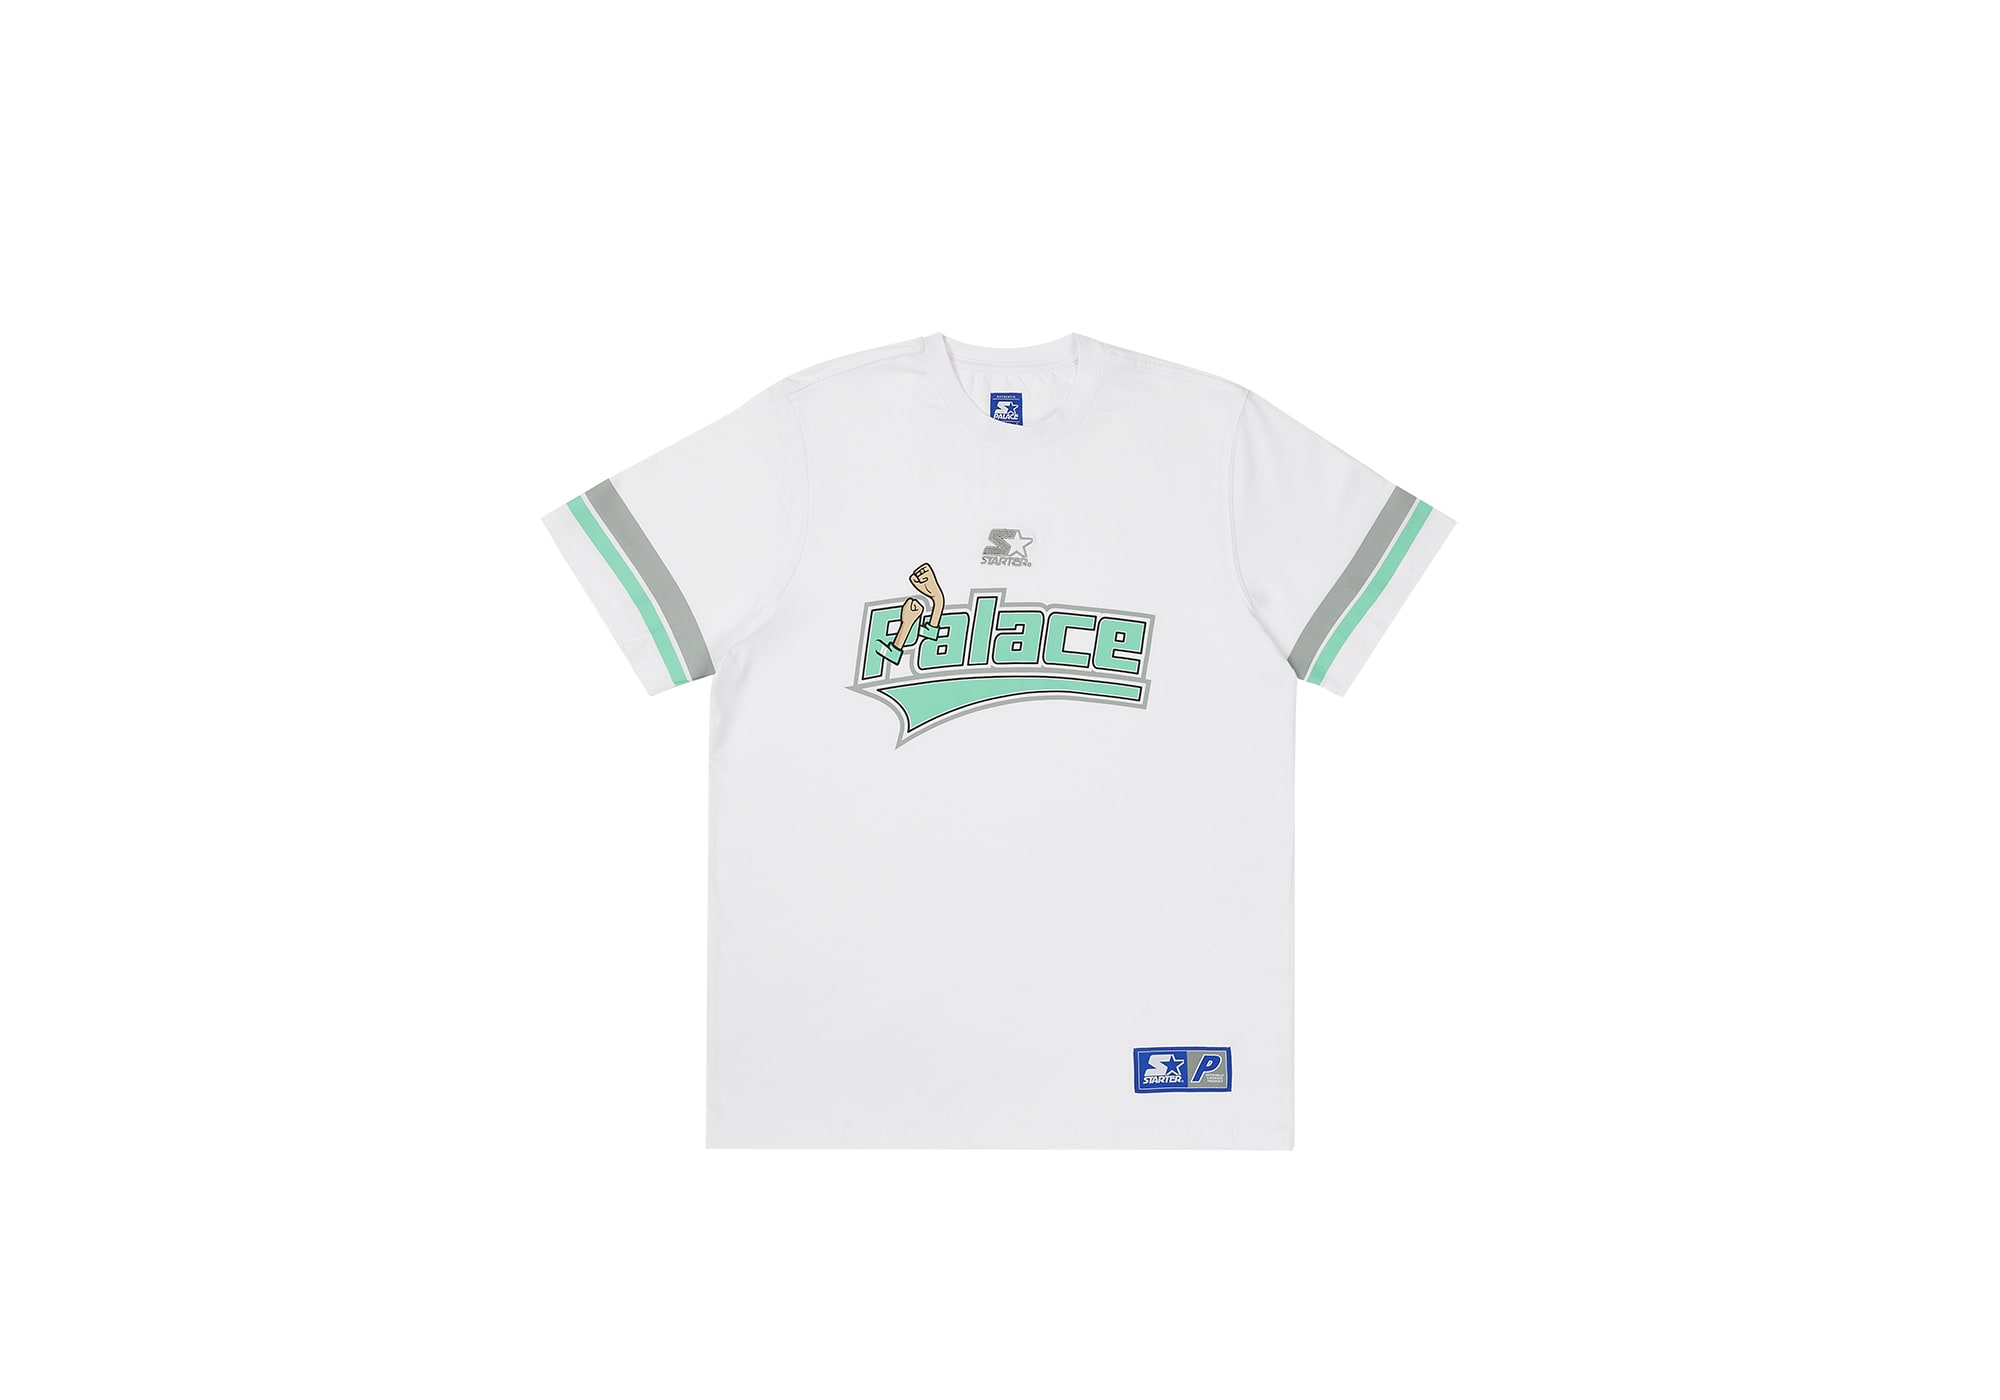 Palace and Starter Come Together for a 90s Revival - Sneaker News